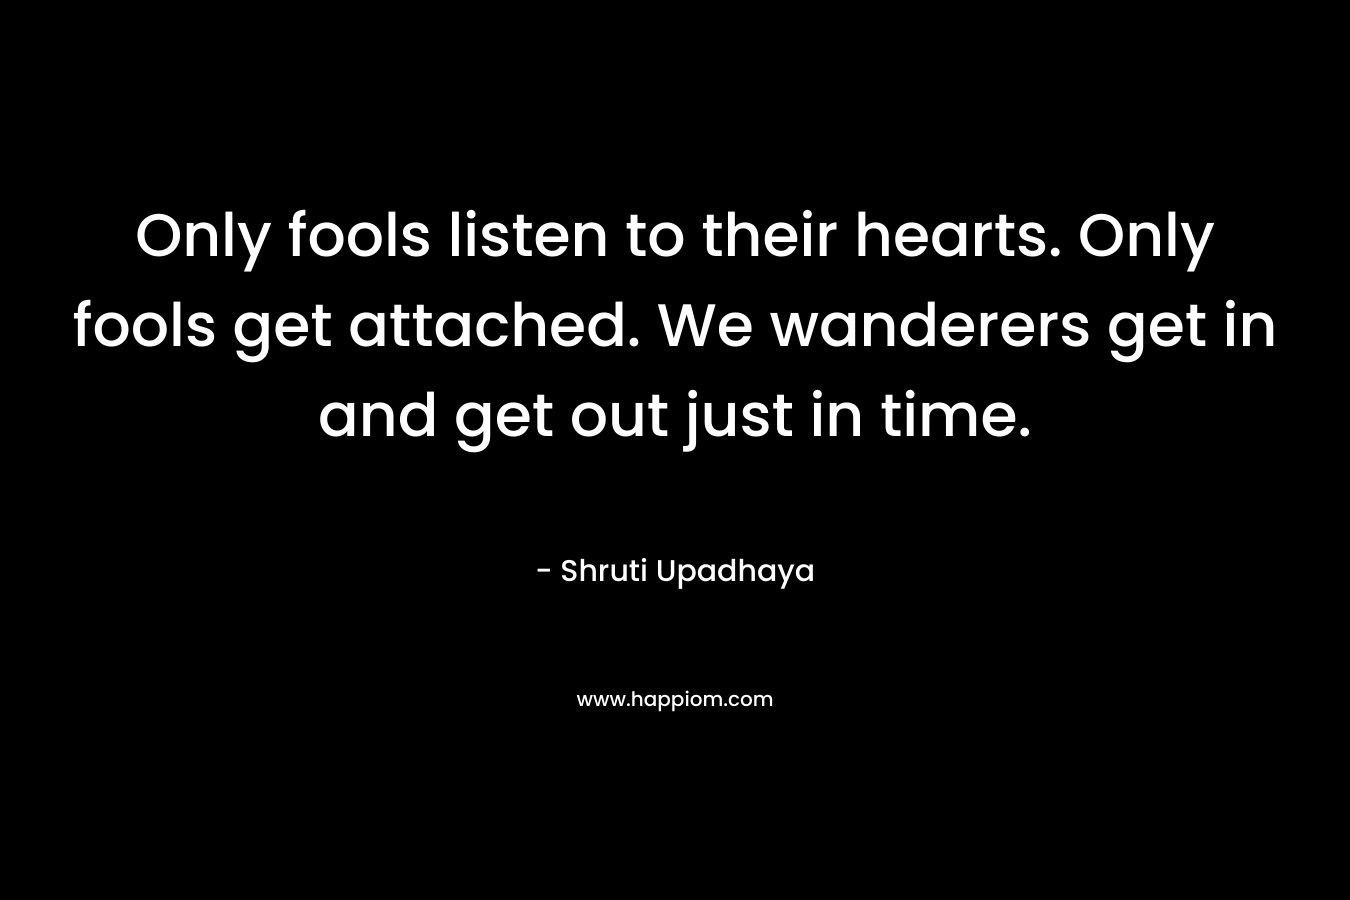 Only fools listen to their hearts. Only fools get attached. We wanderers get in and get out just in time. – Shruti Upadhaya